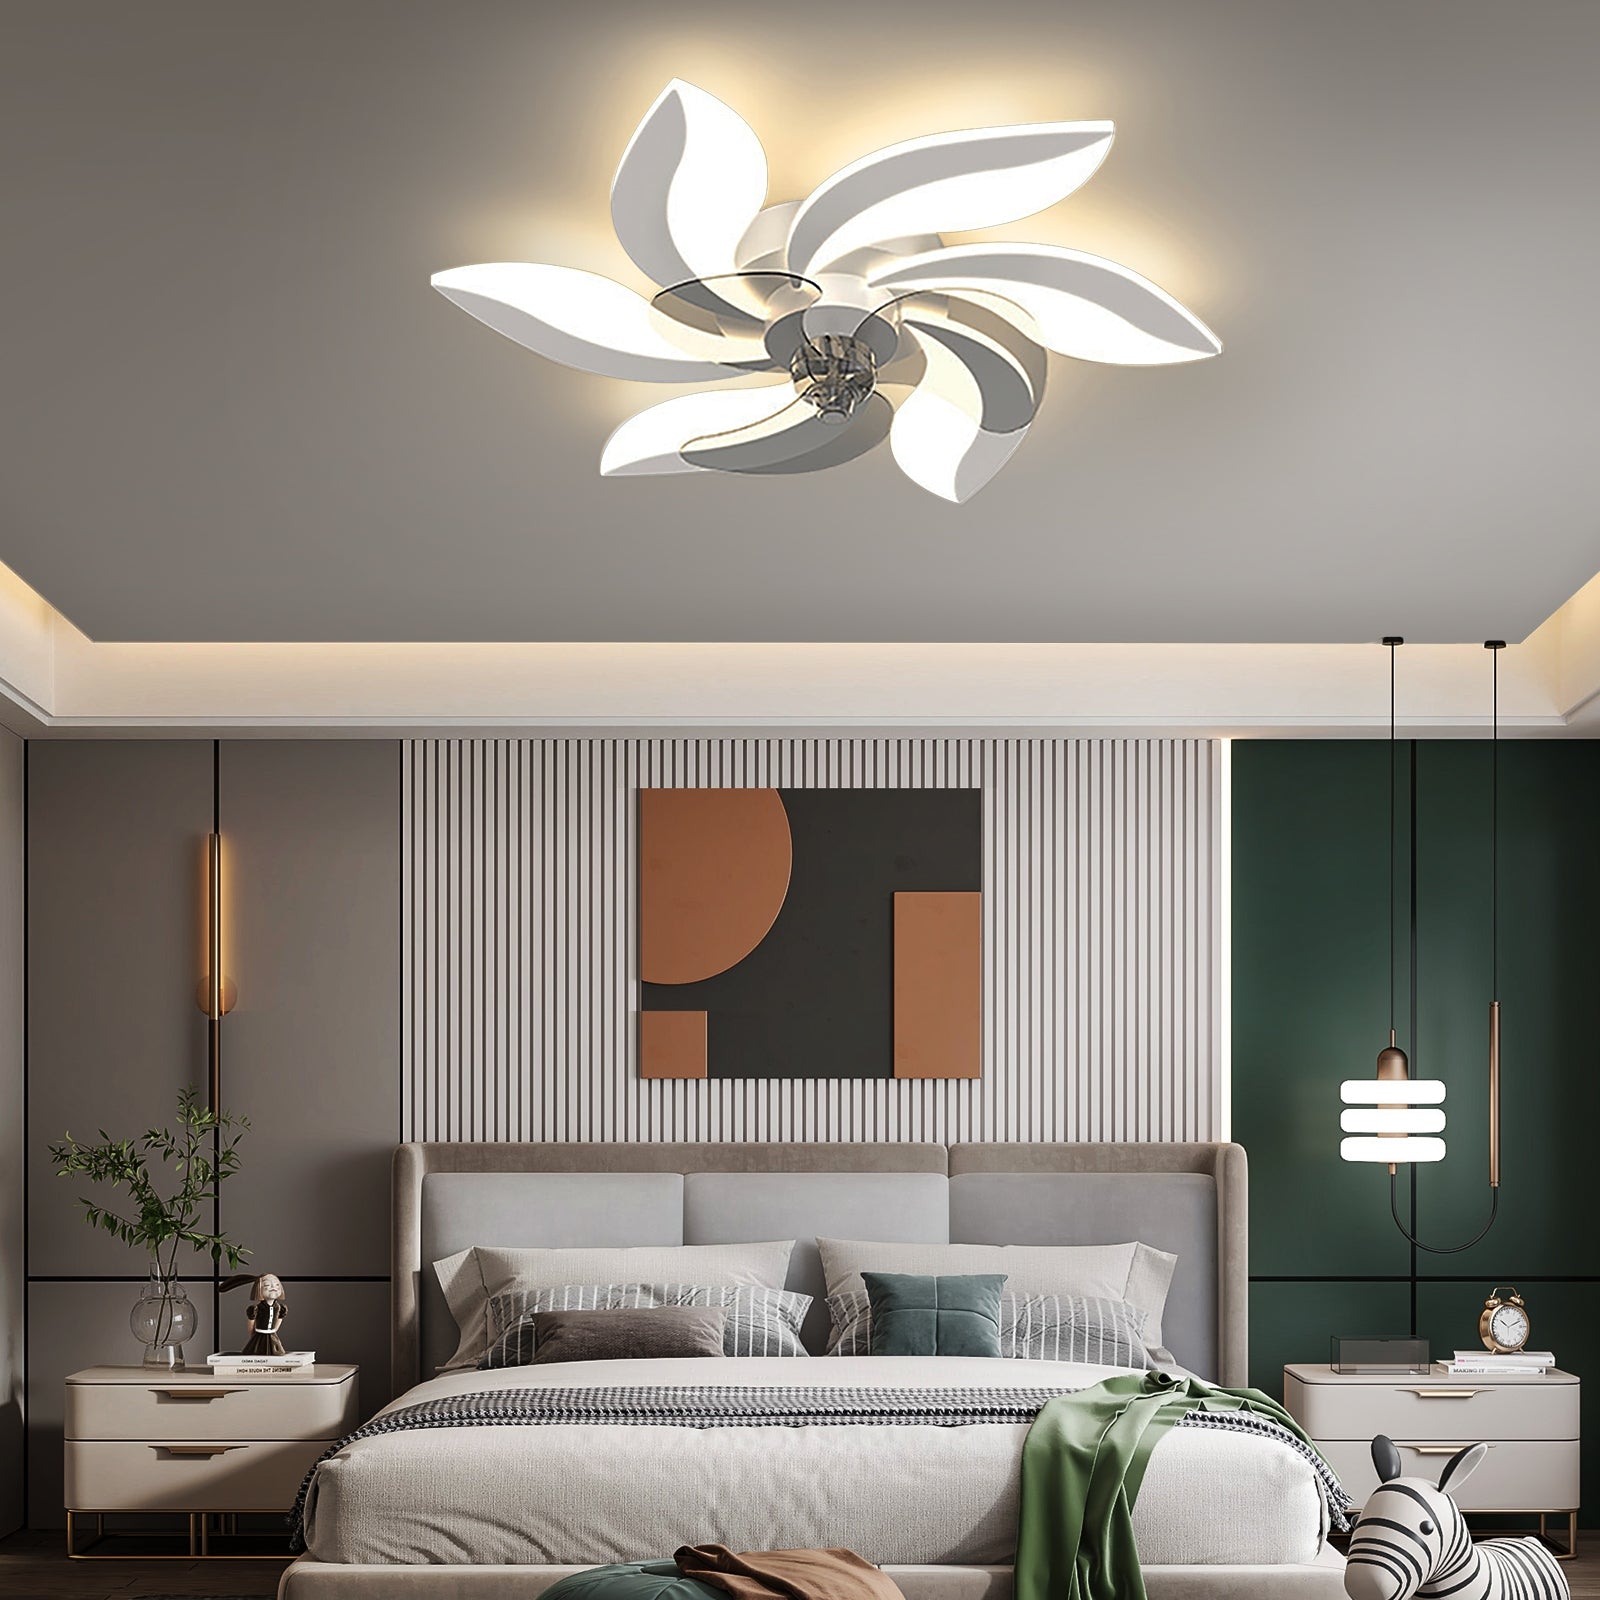 Modern 30.7 Inch LED Ceiling Fan with Remote Control Three Speed Dimming and Three Speed Wind Control Function for Bedroom Study Living Room and Children's Room REYDELUZ